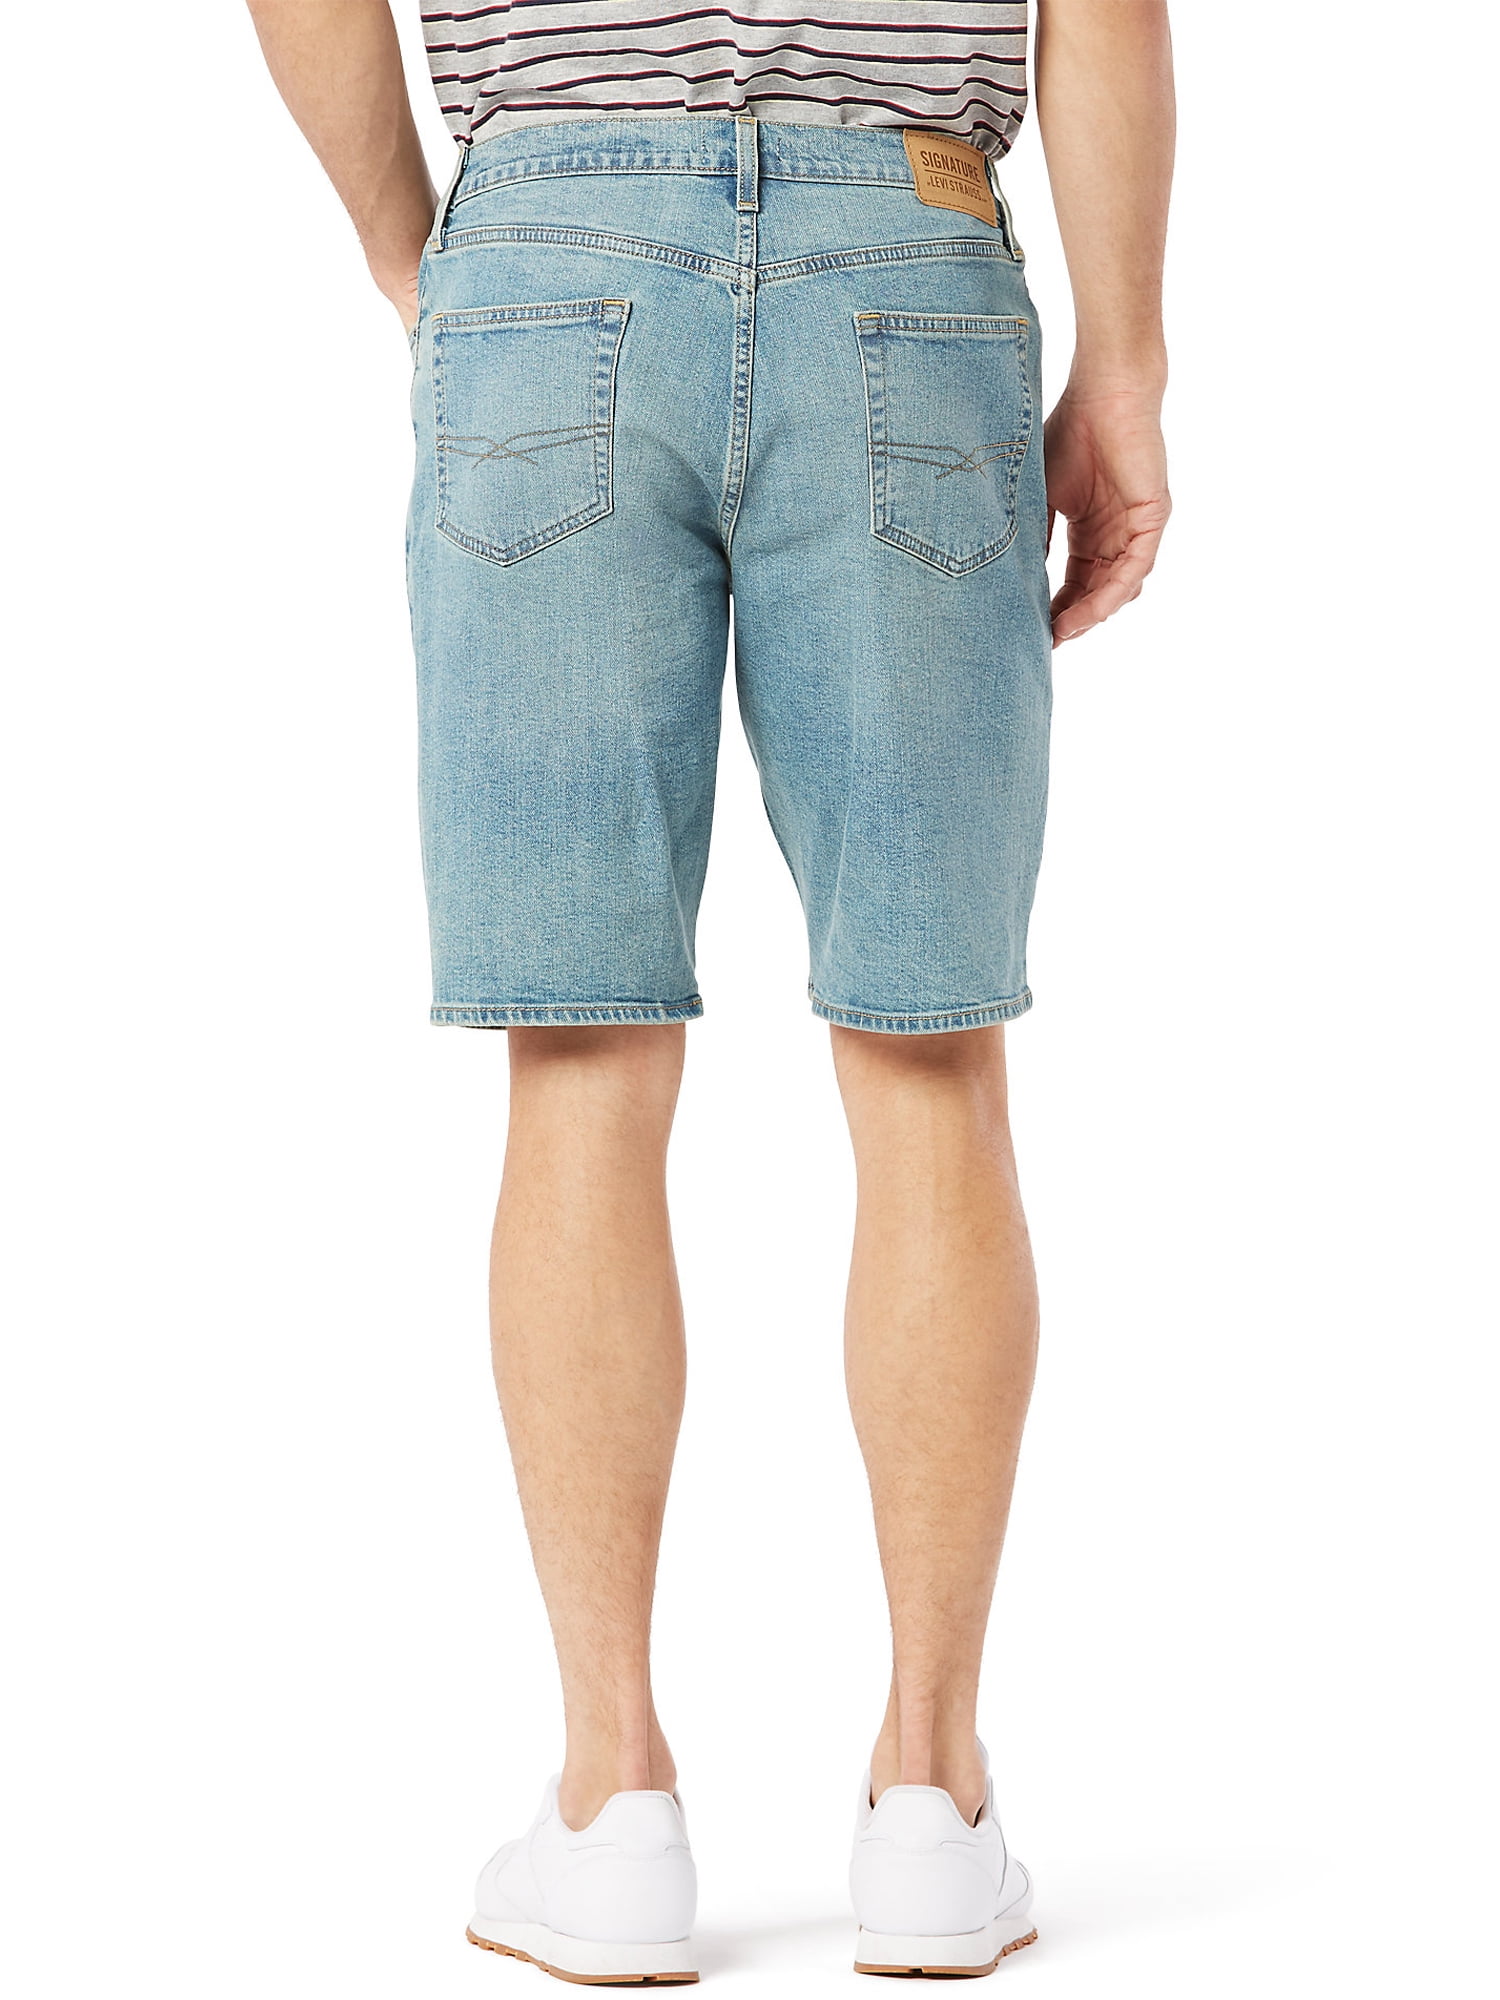 Signature by Levi Strauss & Co. Men's Athletic Denim Shorts